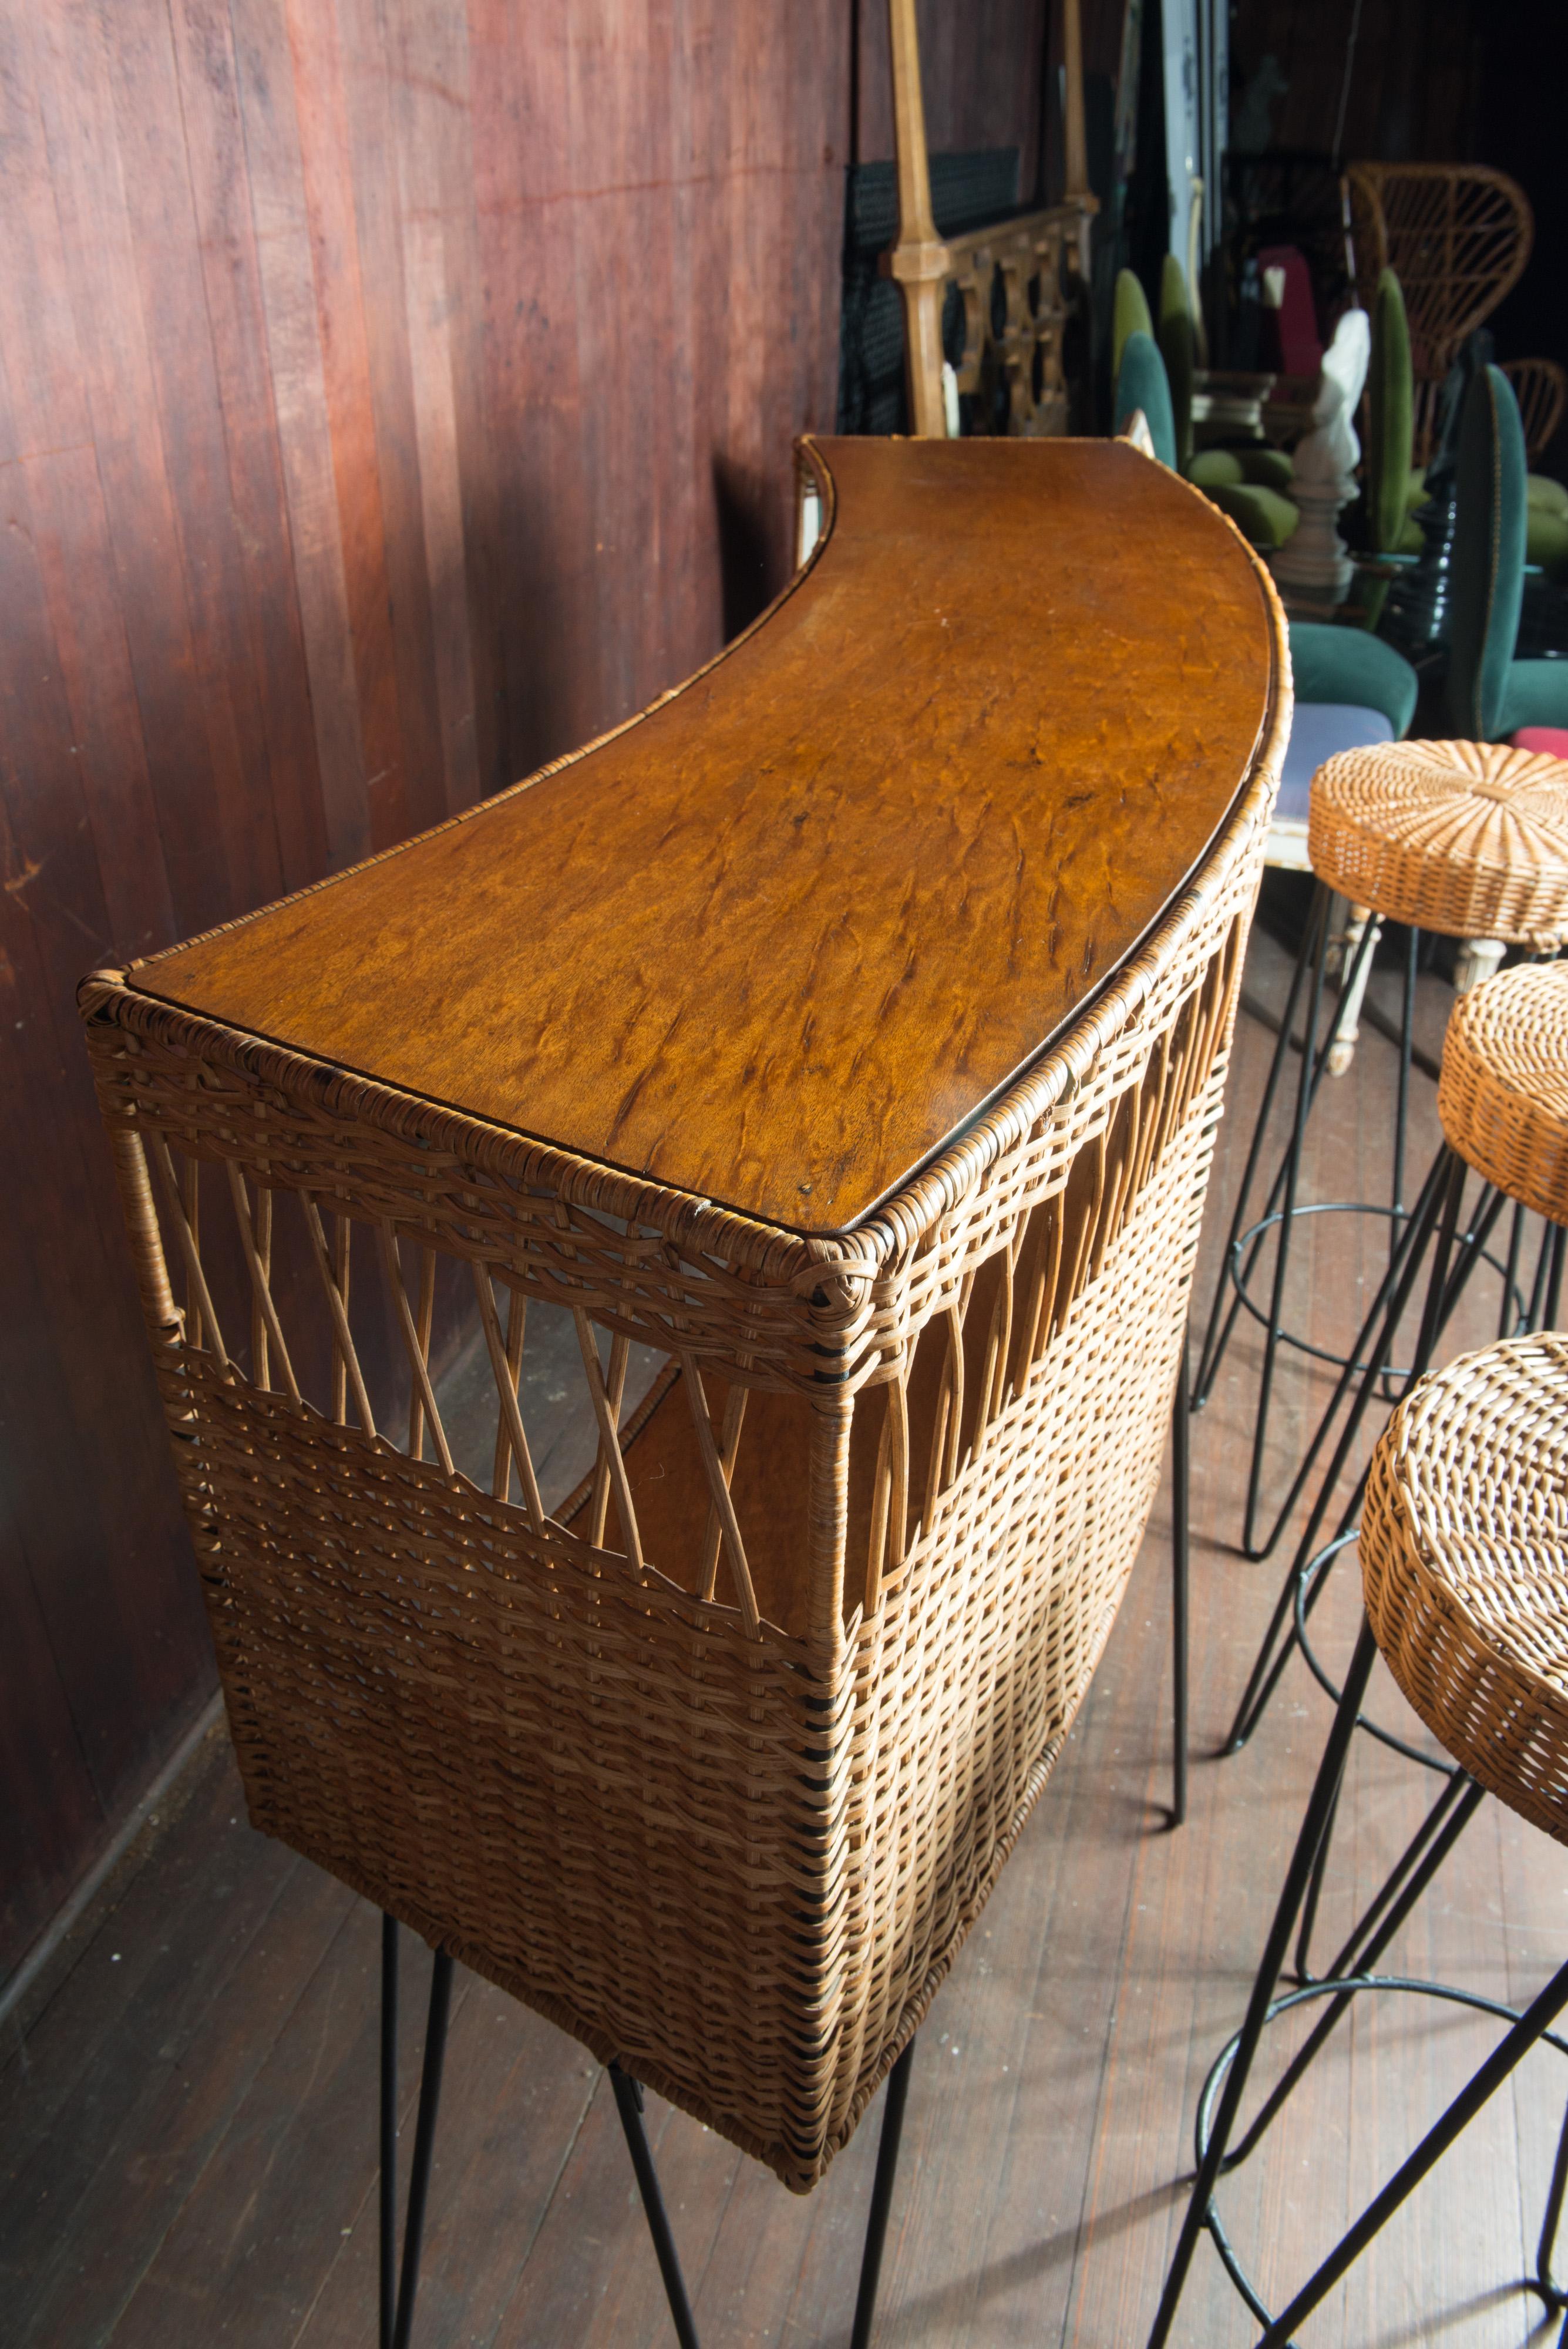 Cote D'Azur Curved Rattan Bar and Three Stools In Good Condition For Sale In Stamford, CT